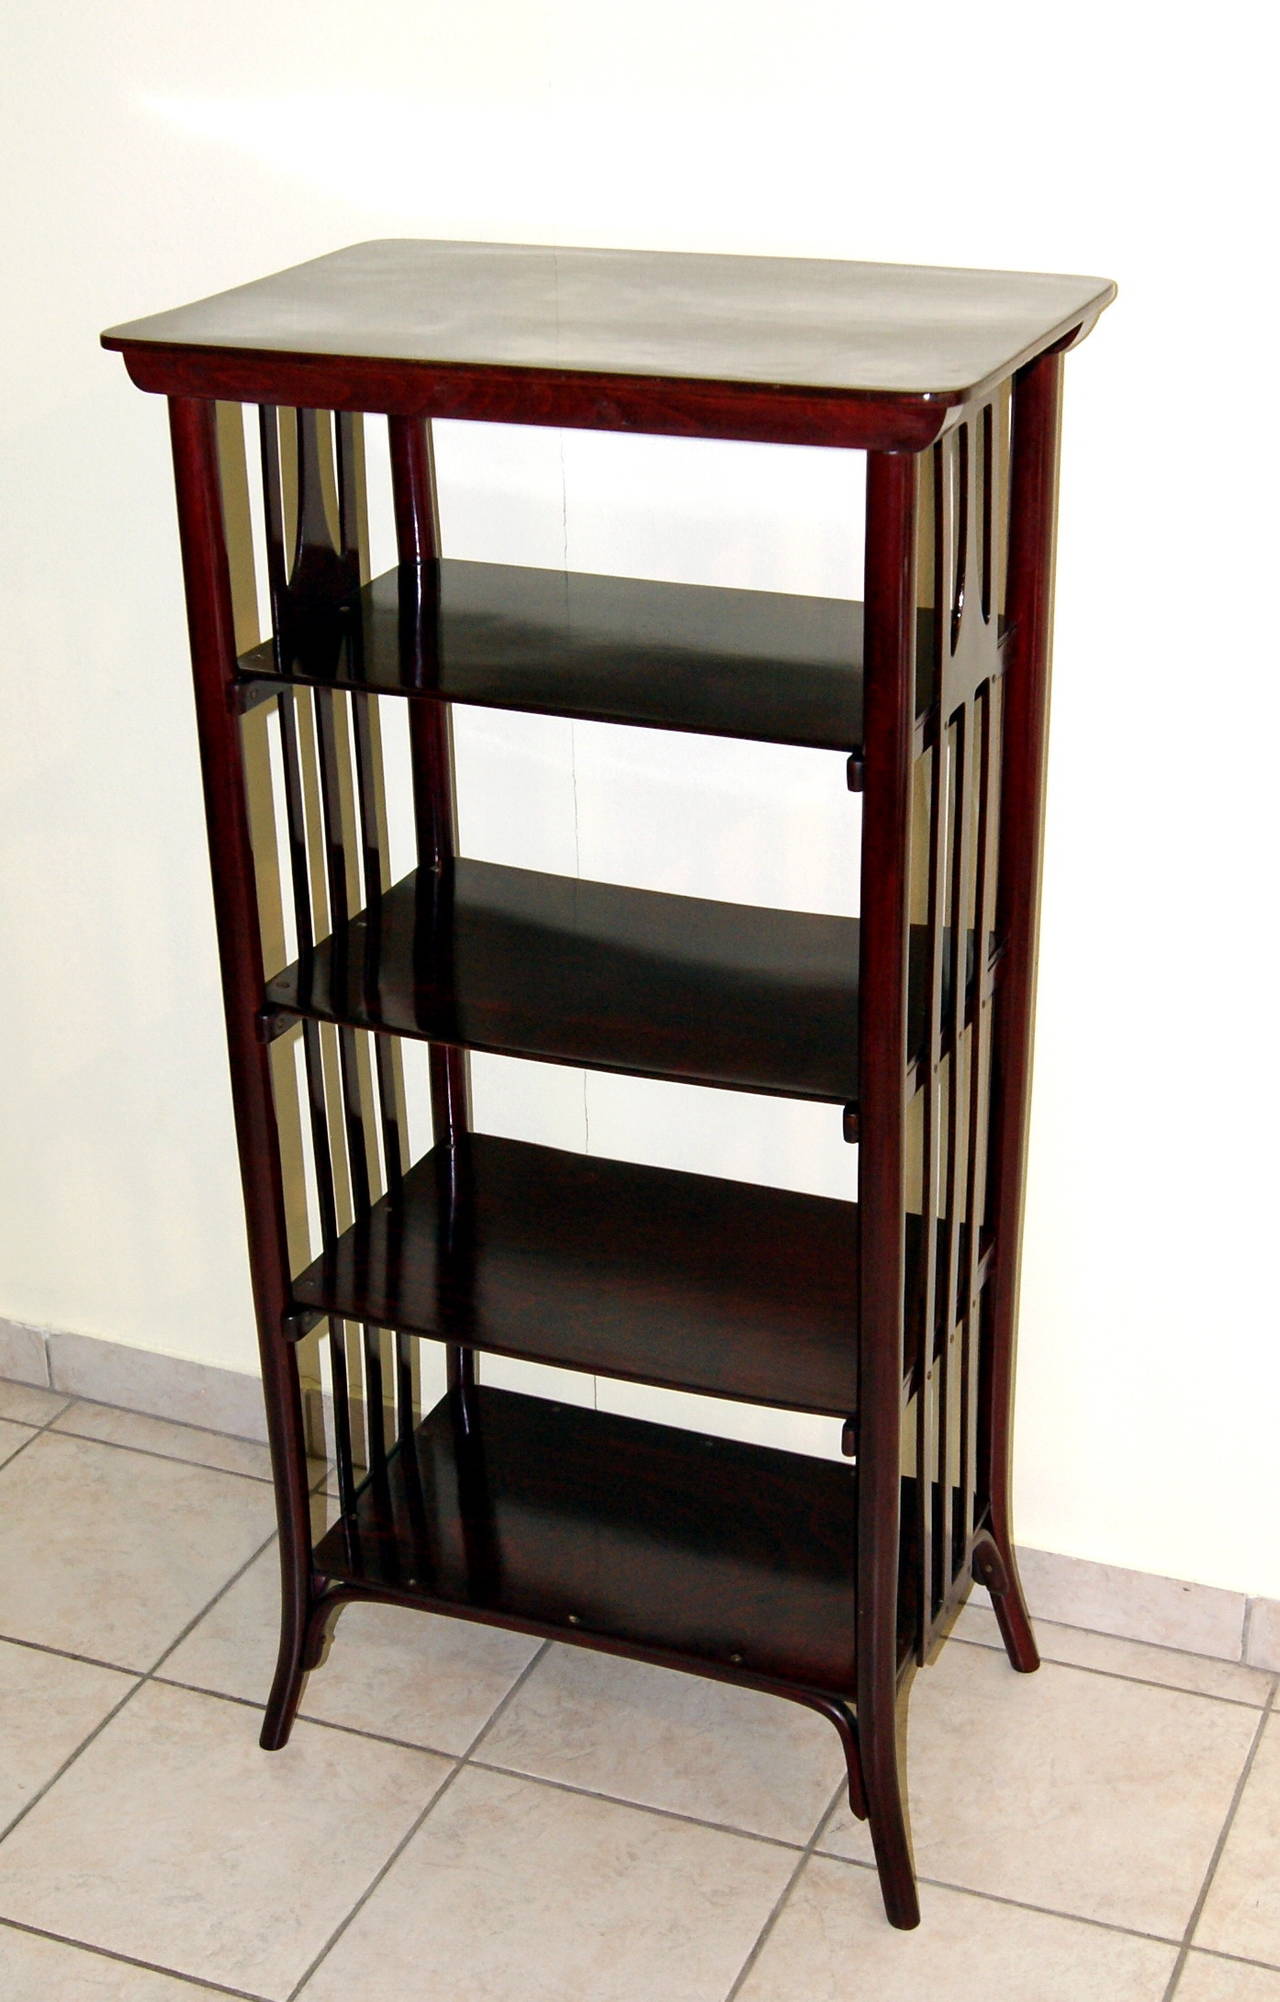 Thonet Art Nouveau Vienna Etagère or Bookshelf
made  circa 1905  - 1910

beech wood and dark mahogany stained
refurbished by hand

Most elegant etagère having four shelves where books or objects/articles of virtue can be put on: This model